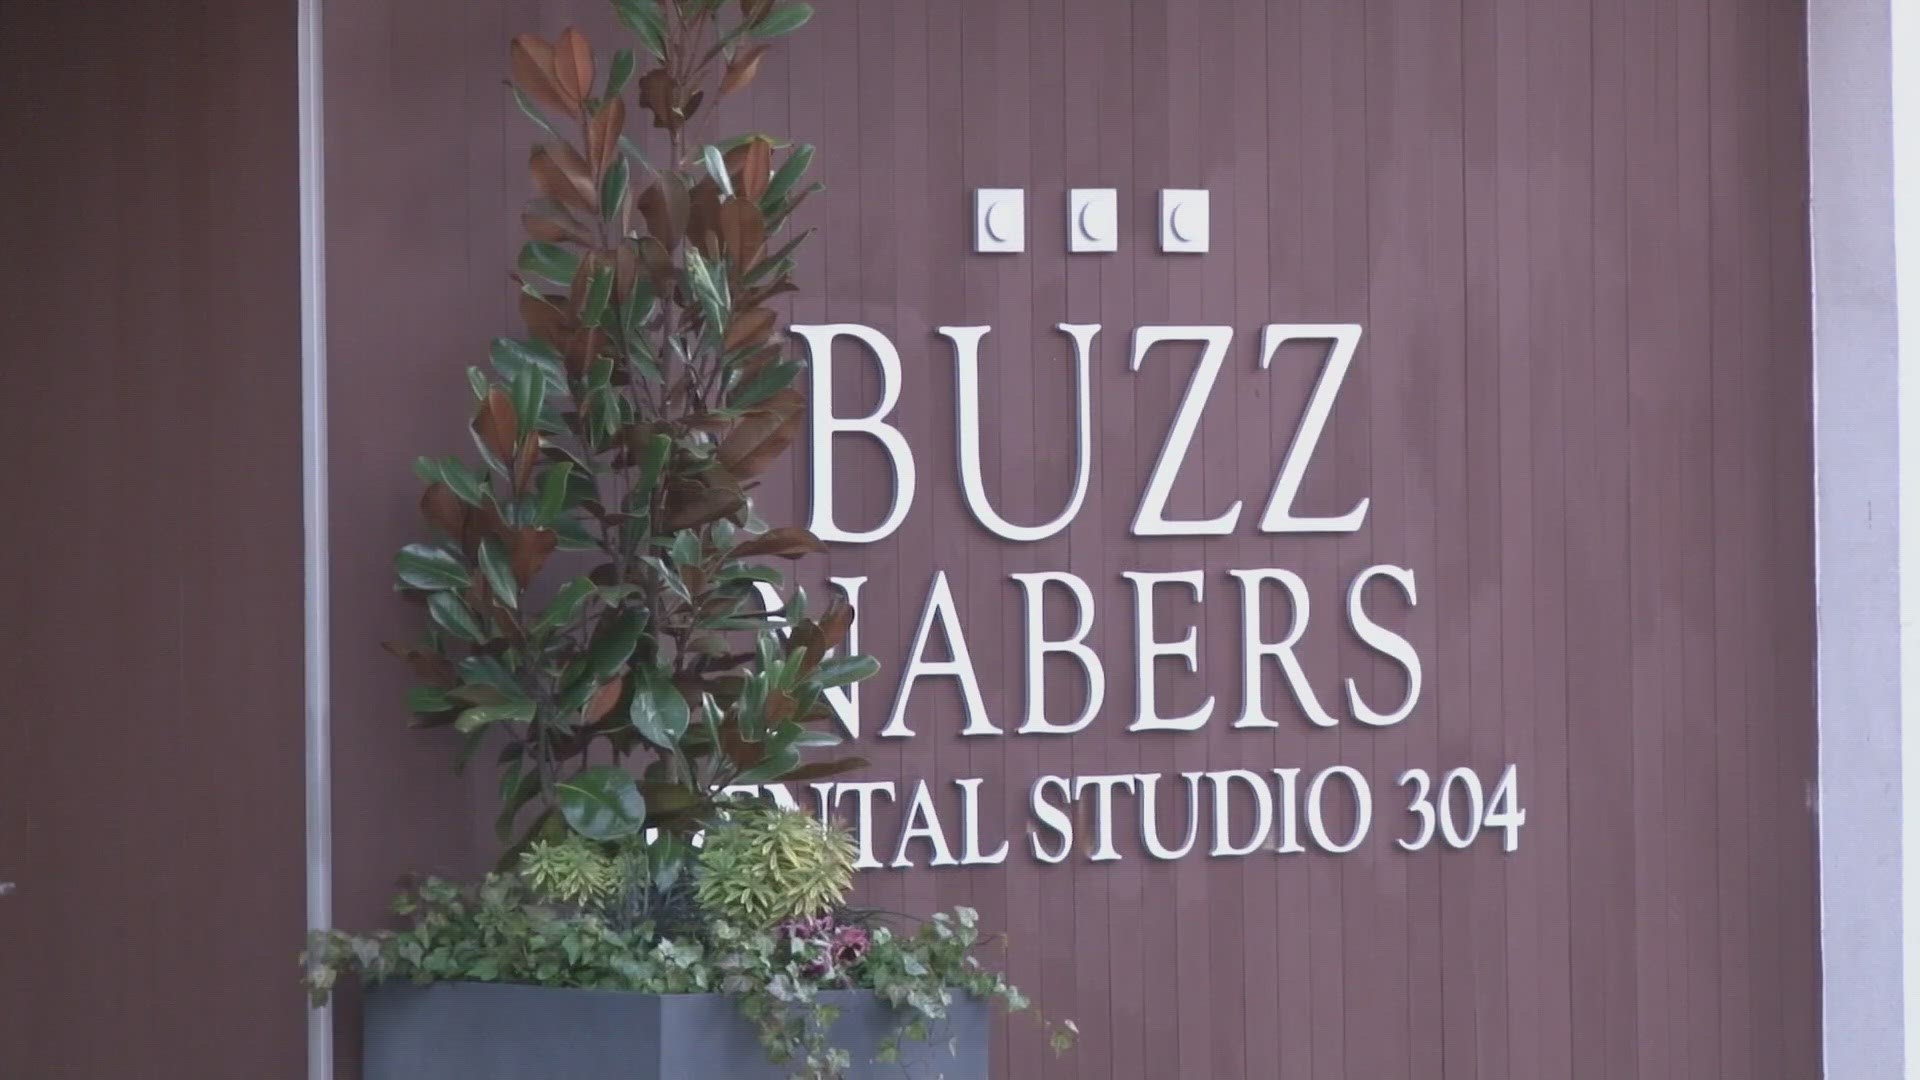 Buzz Nabers entered a plea agreement with the government in July, records show, and was sentenced Friday in federal court.